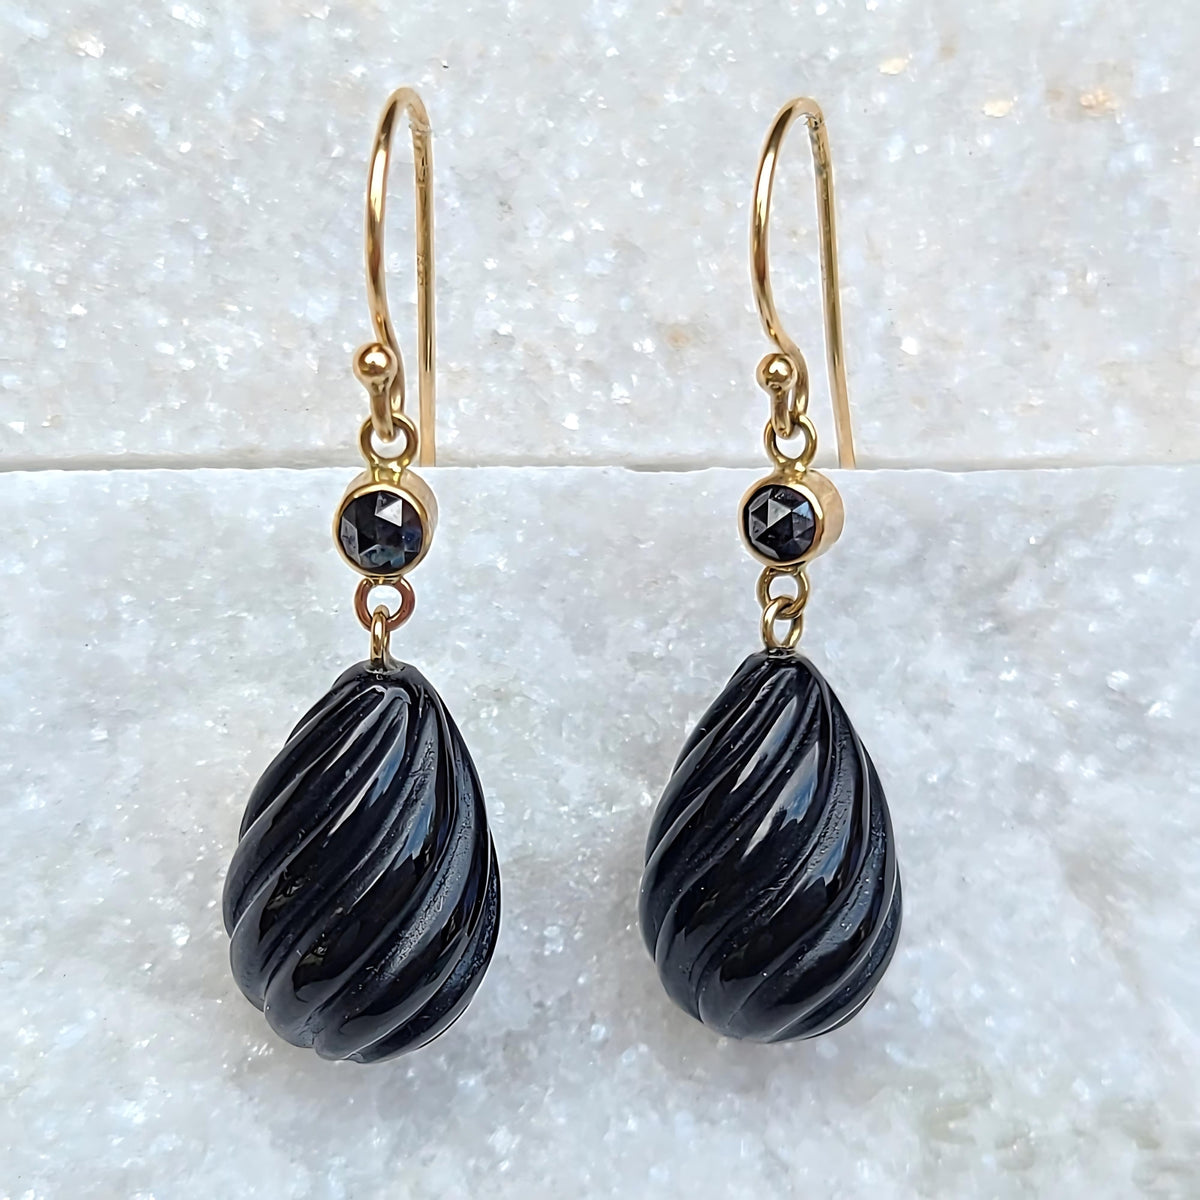 Sincerely Ginger Jewelry 14K Onyx Earrings with Black Diamond Accents